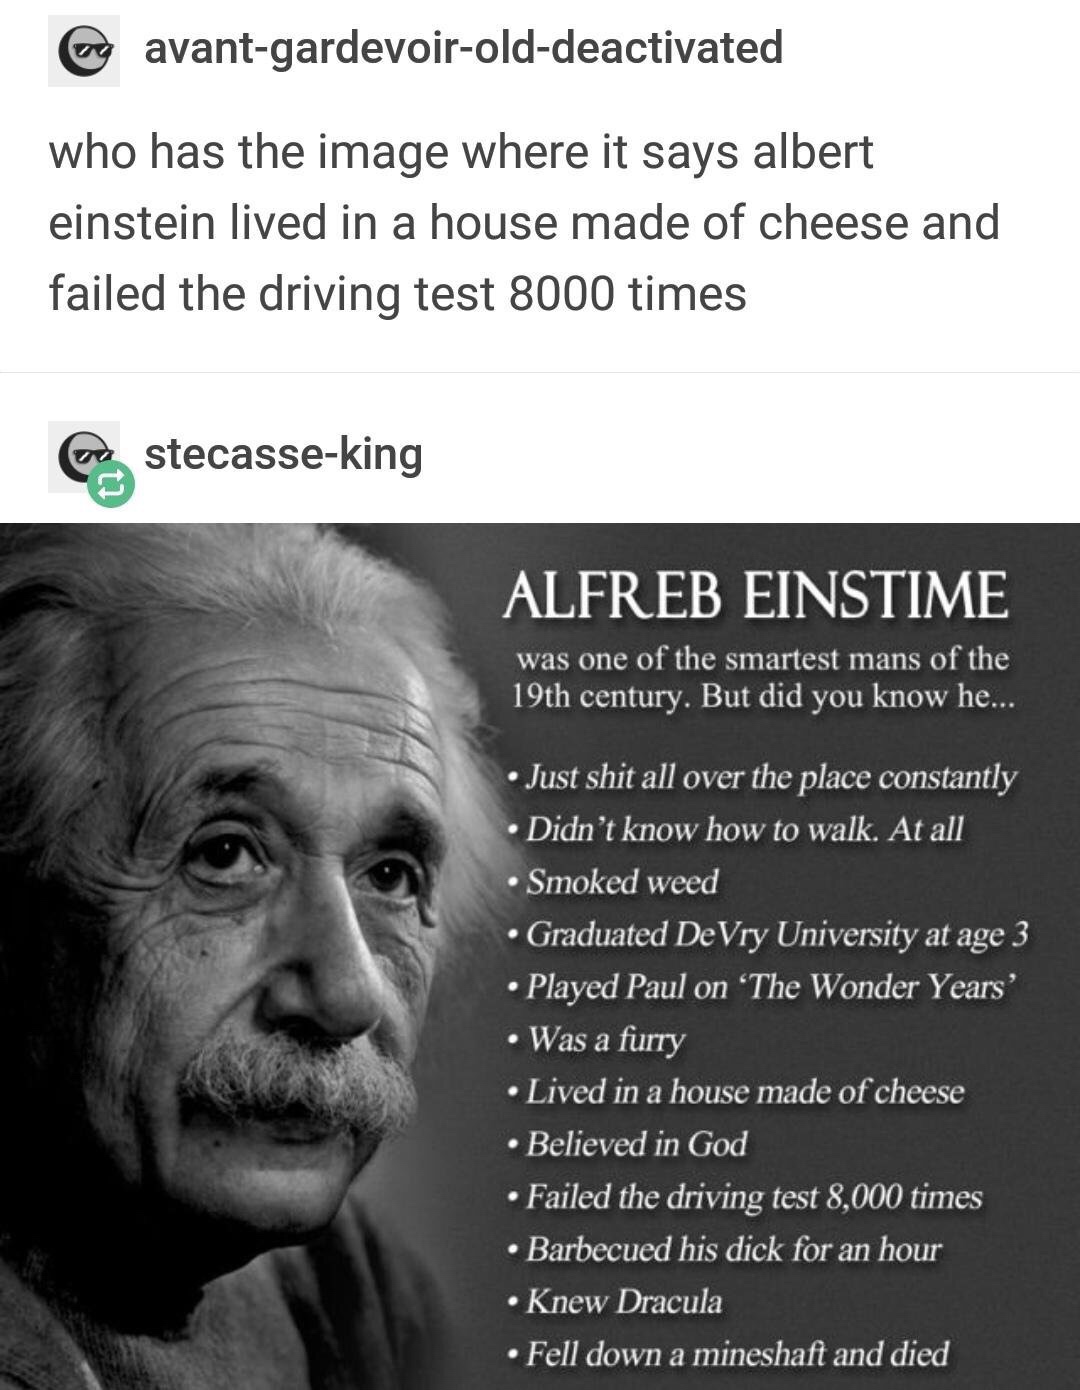 dank meme albert einstein - g avantgardevoirolddeactivated who has the image where it says albert einstein lived in a house made of cheese and failed the driving test 8000 times Castecasseking Alfreb Einstime was one of the smartest mans of the 19th centu